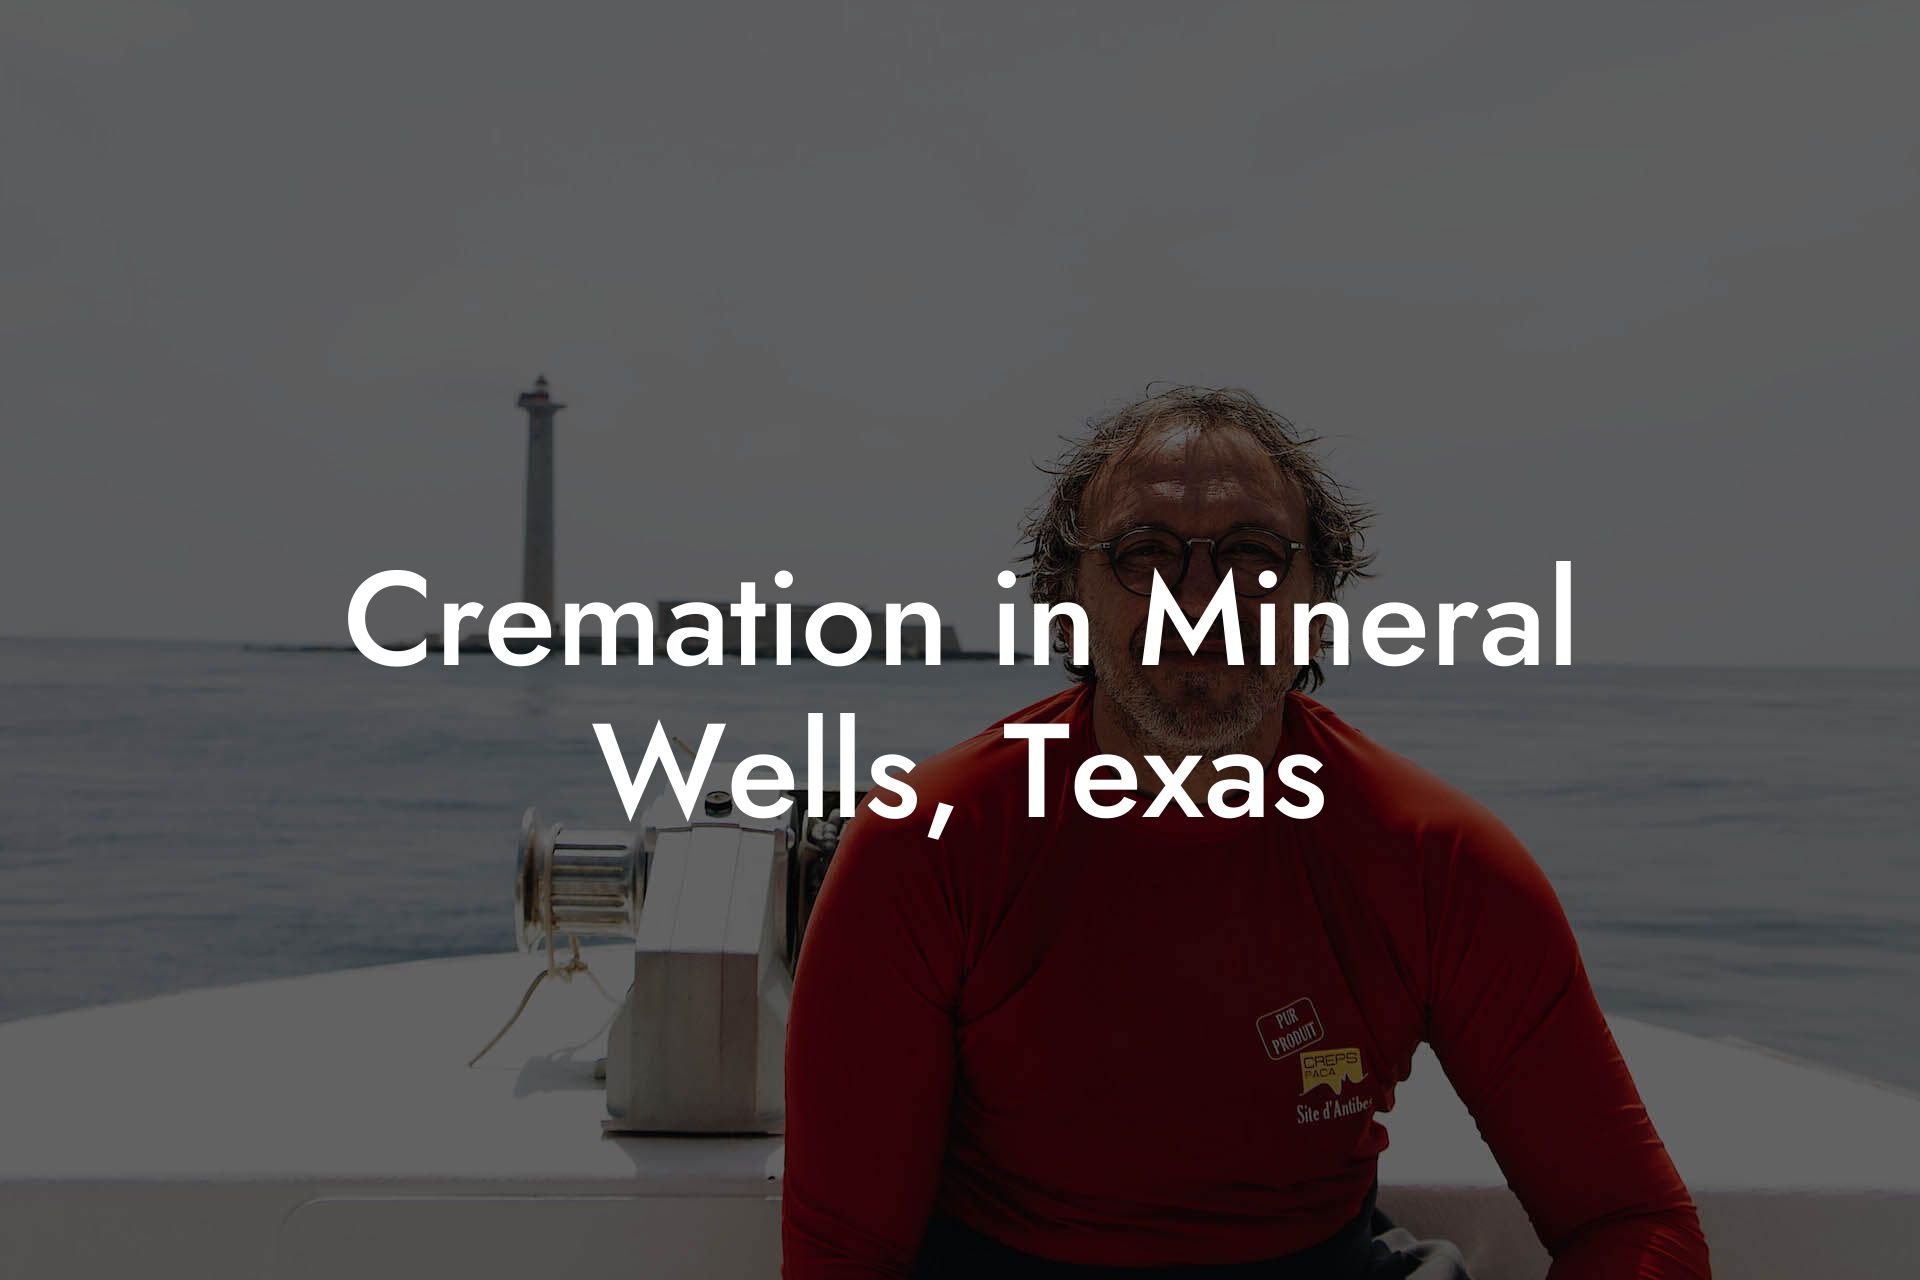 Cremation in Mineral Wells, Texas